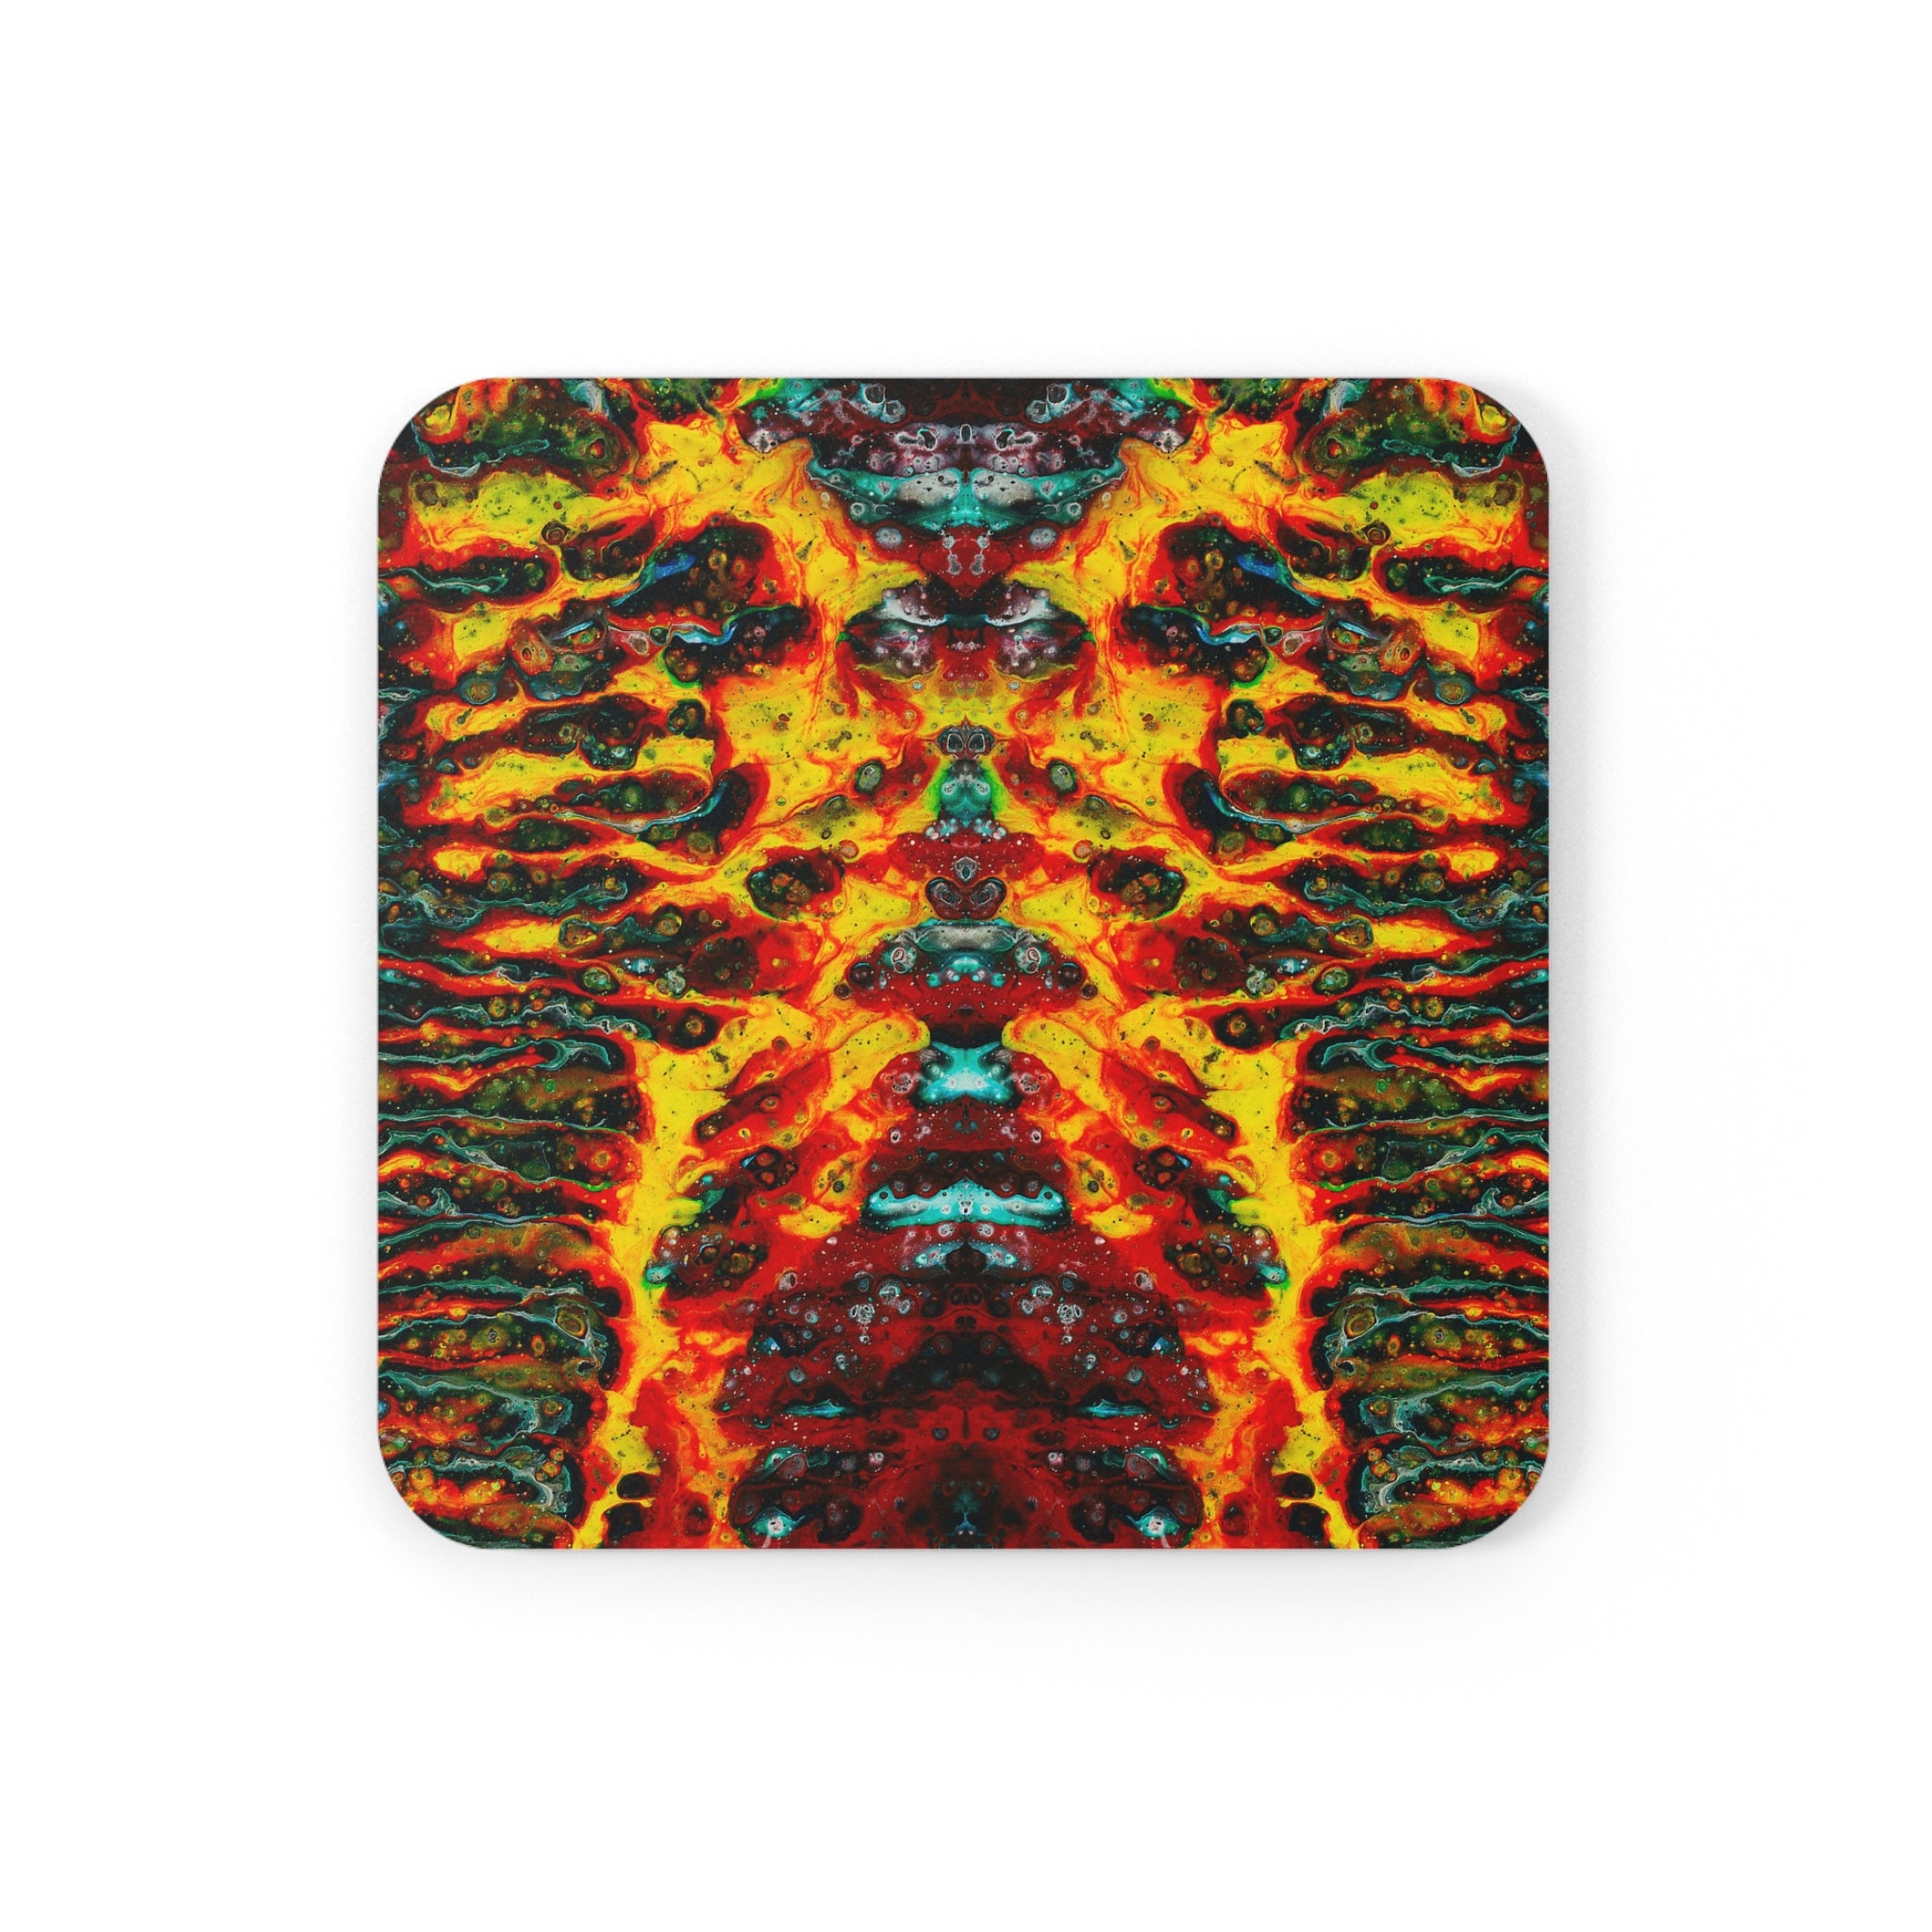 Cameron Creations - Floating Flames - Stylish Coffee Coaster - Square Front